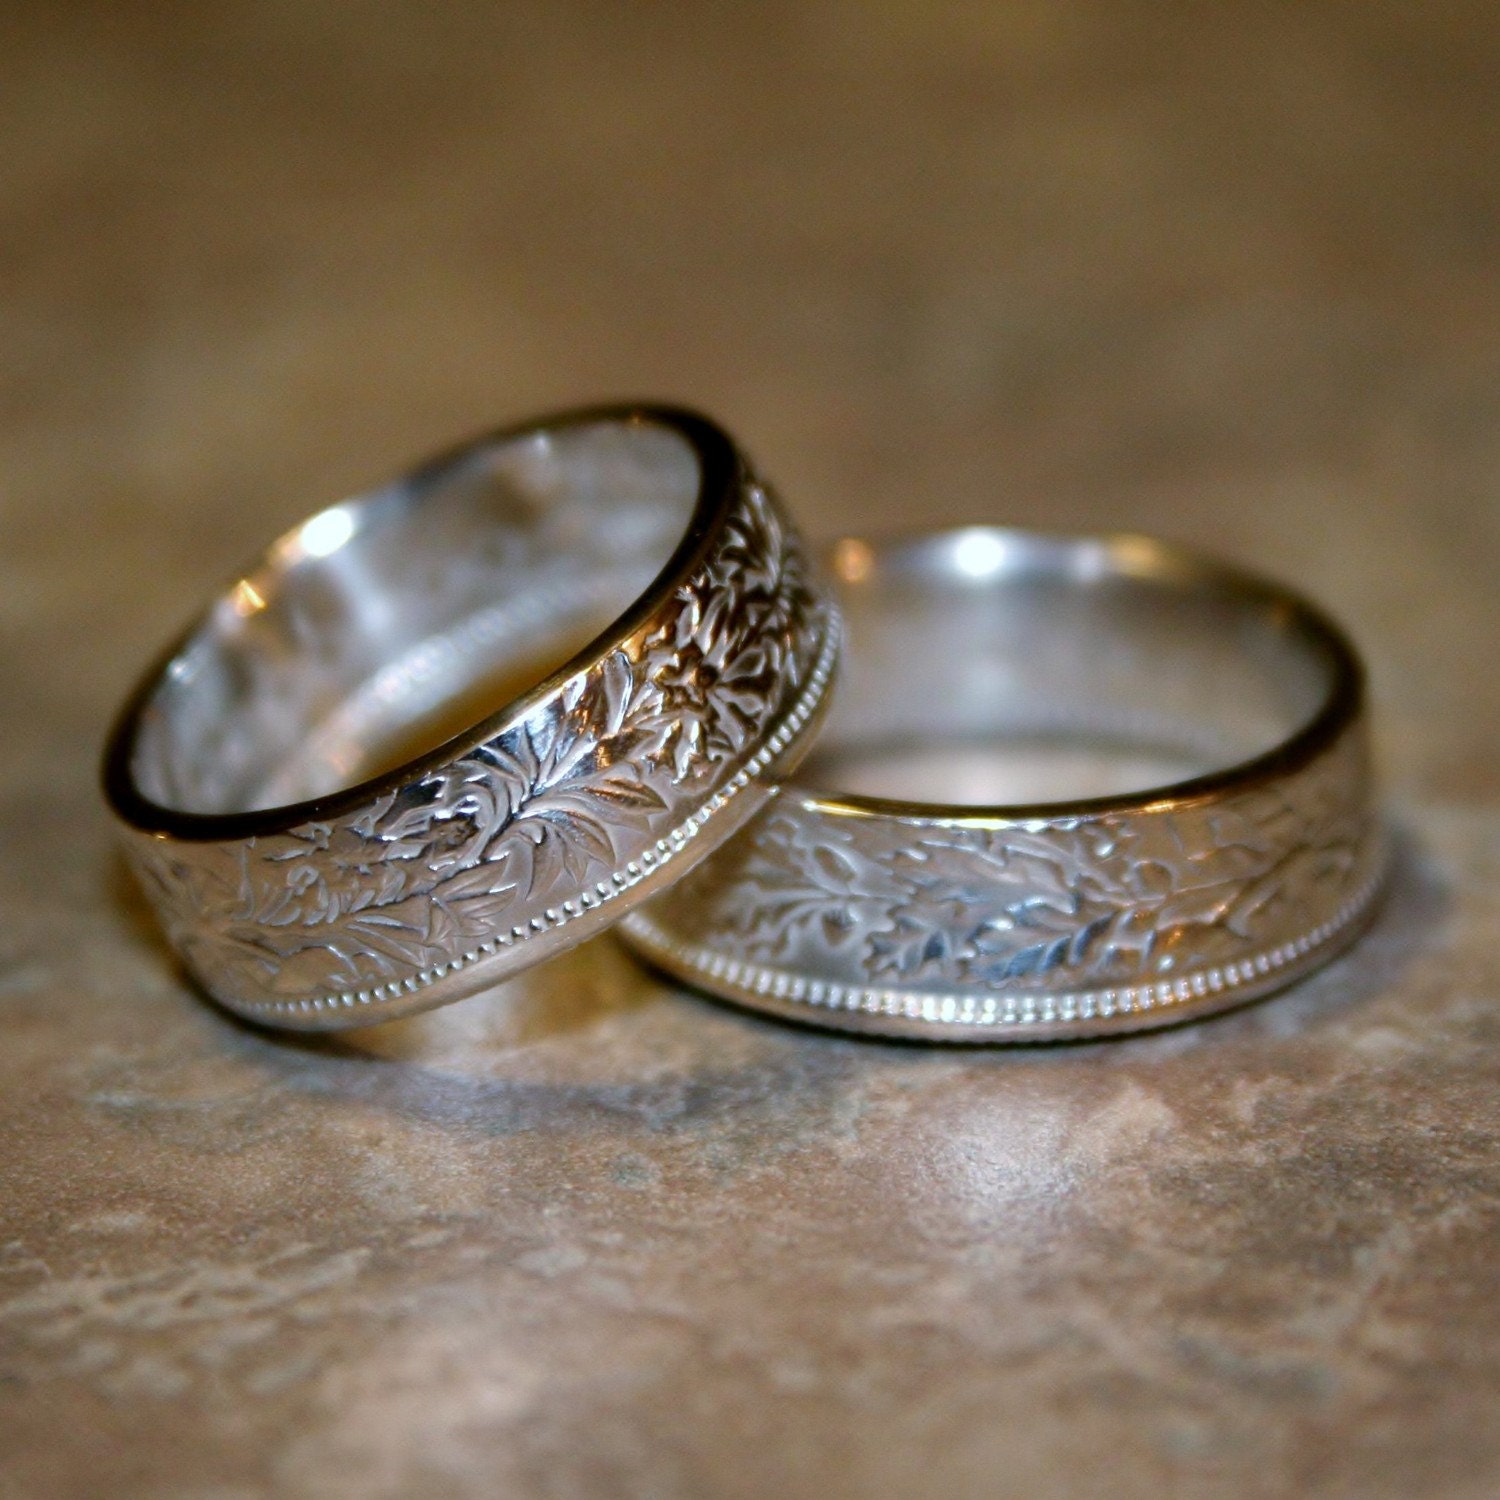 2 Franc double sided coin ring Size 7-12
